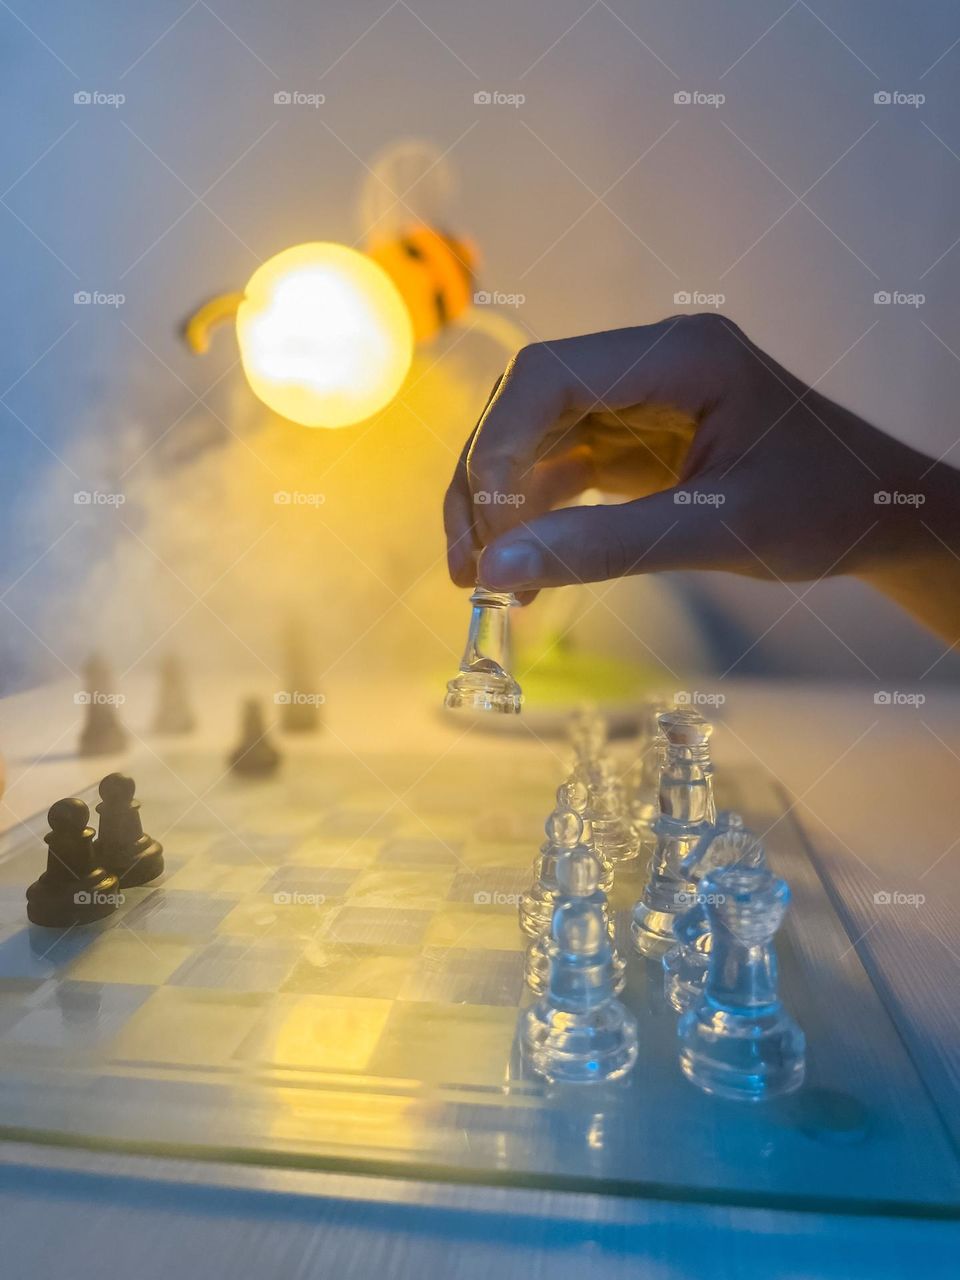 Chess player, warm and cold color 